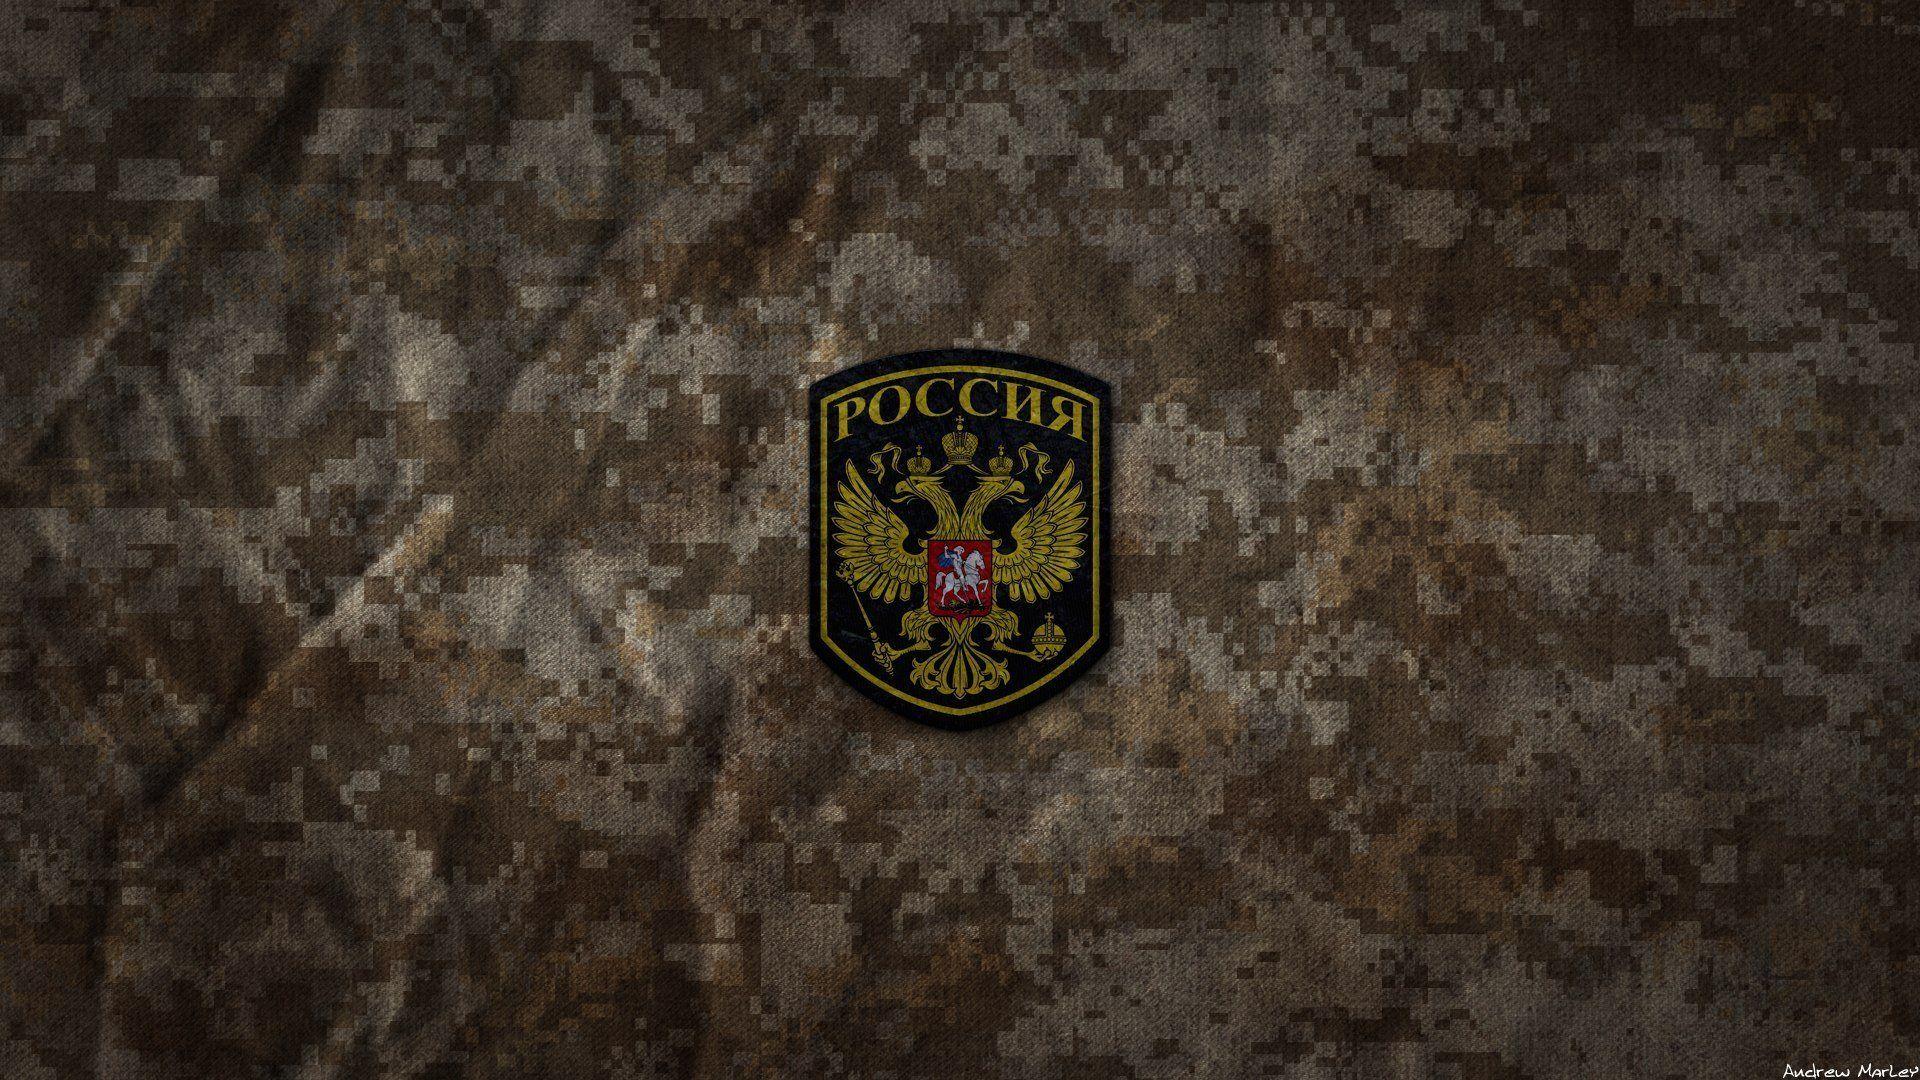 the army russia camouflage rrf collective security treaty